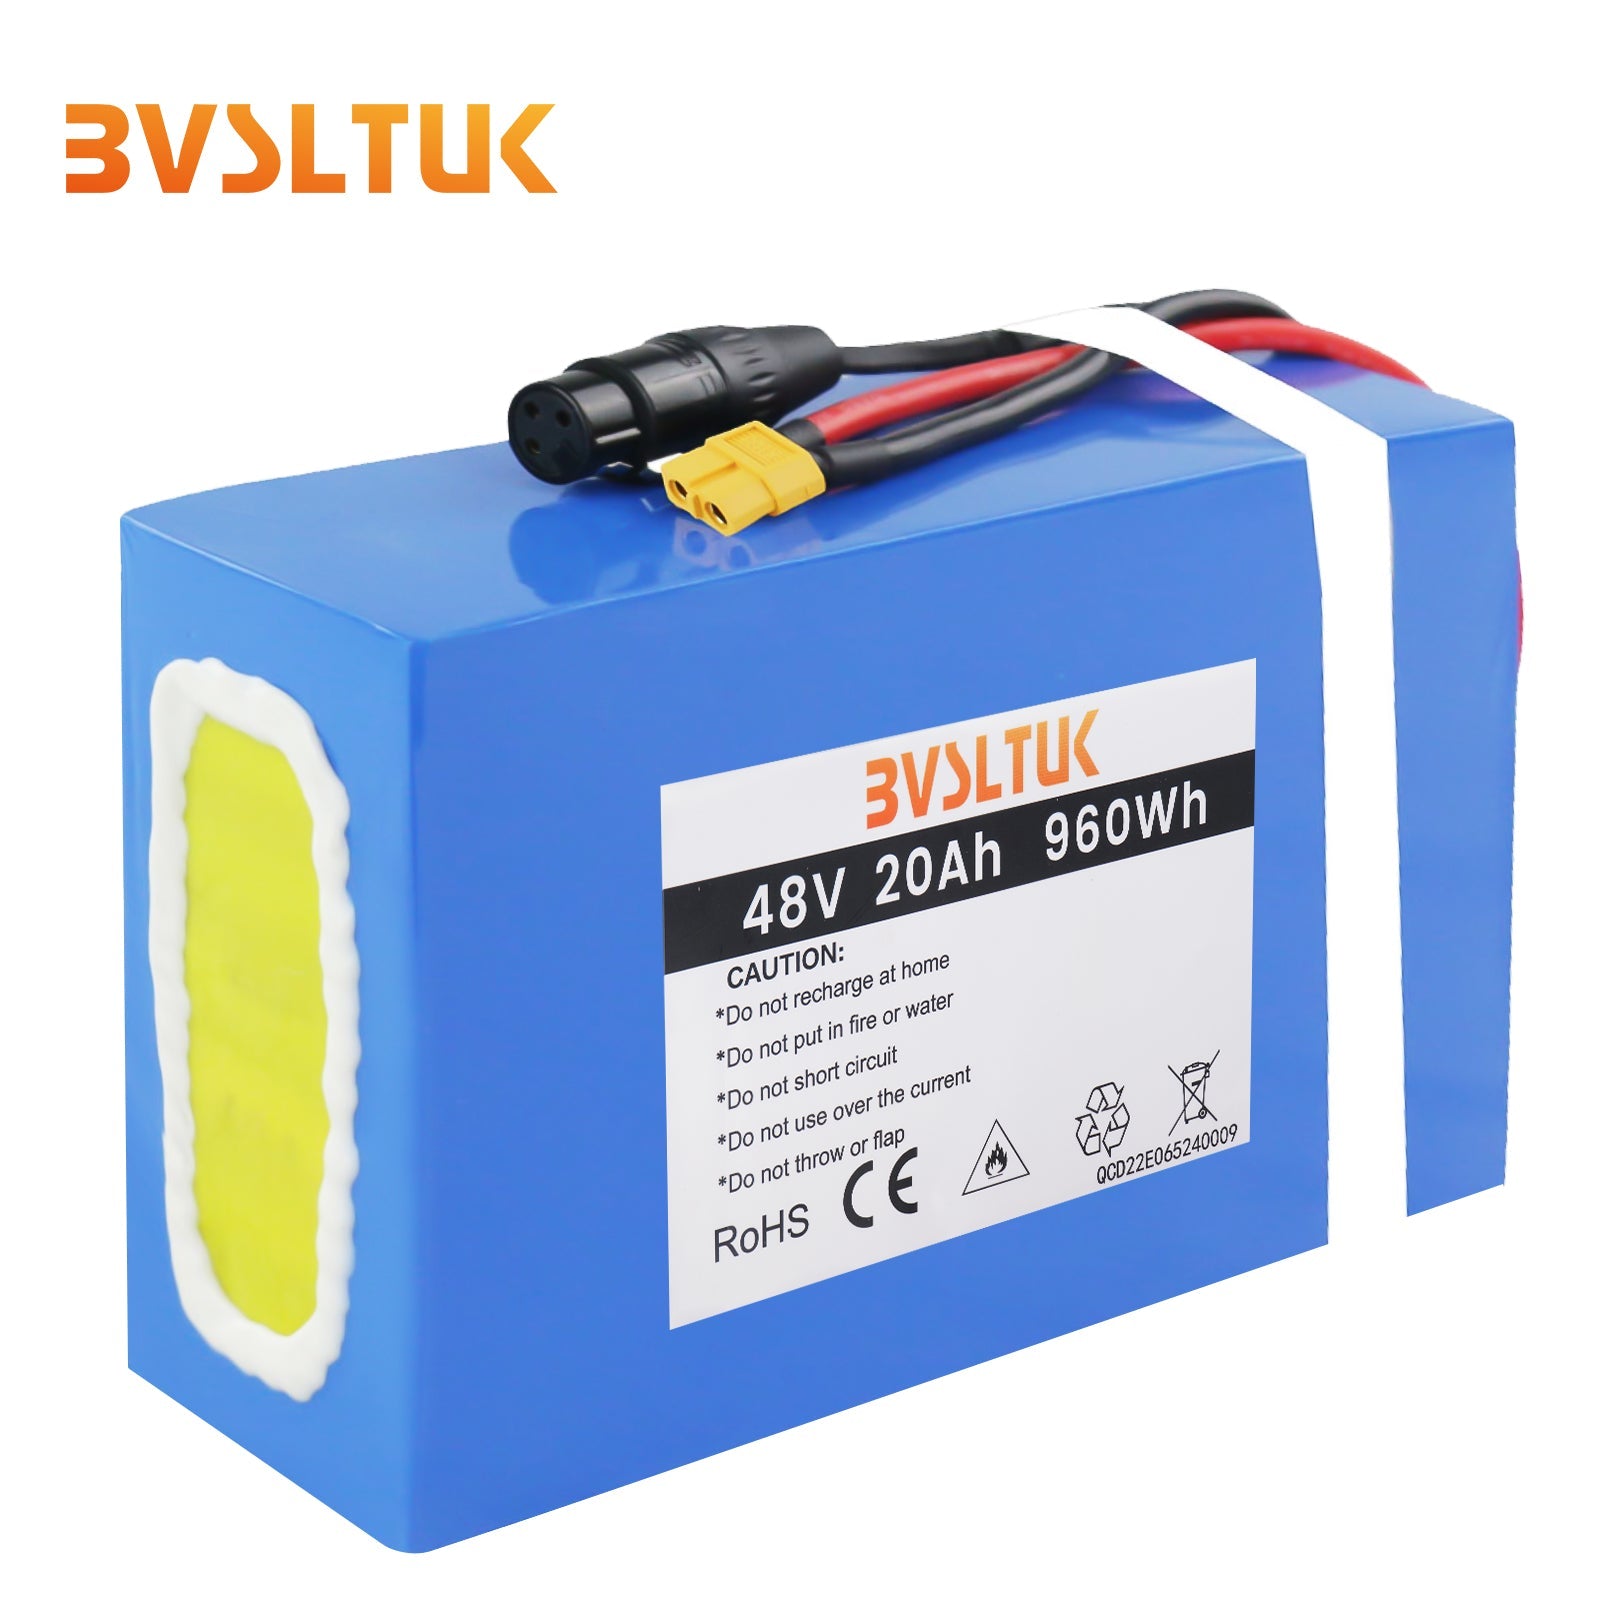 48V 20AH Ebike Battery for 50W-1800W Ebike Motercycle, Go-kart, Scooter, Waterproof lithium Battery Pack Rechargeable